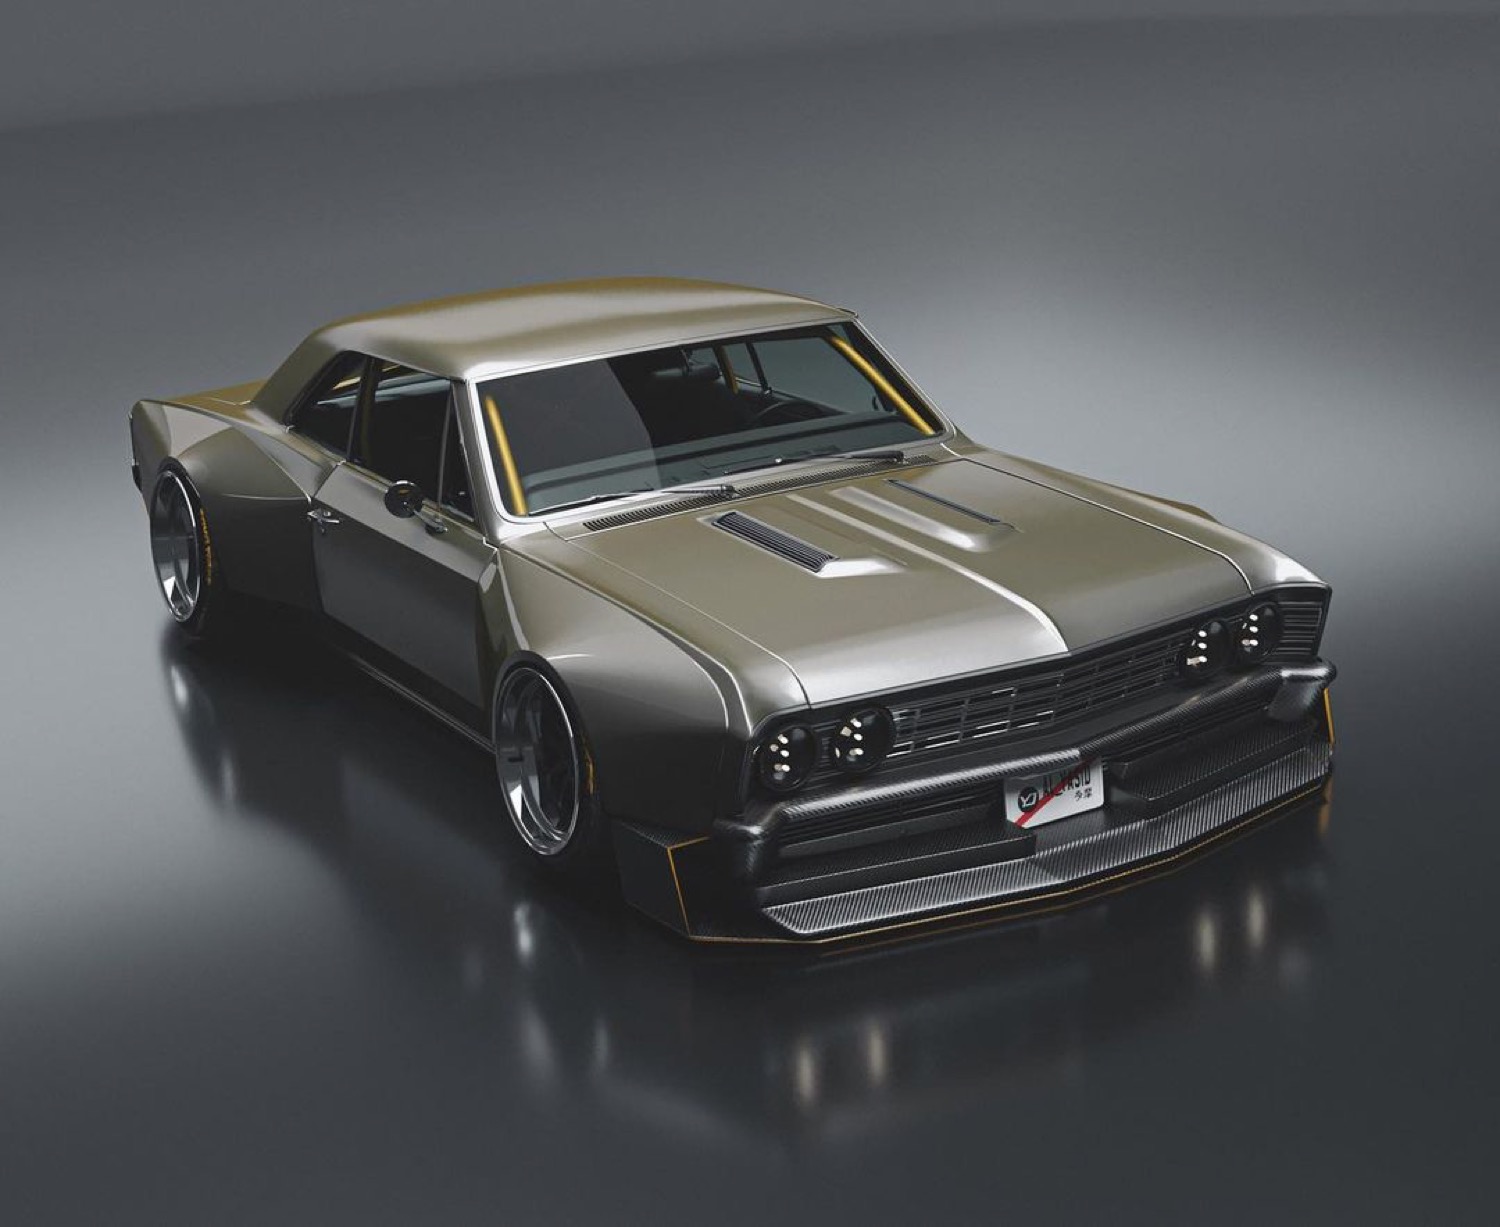 Widebody Chevy Chevelle Rendering Adds Aggressive Modern Performance Style.